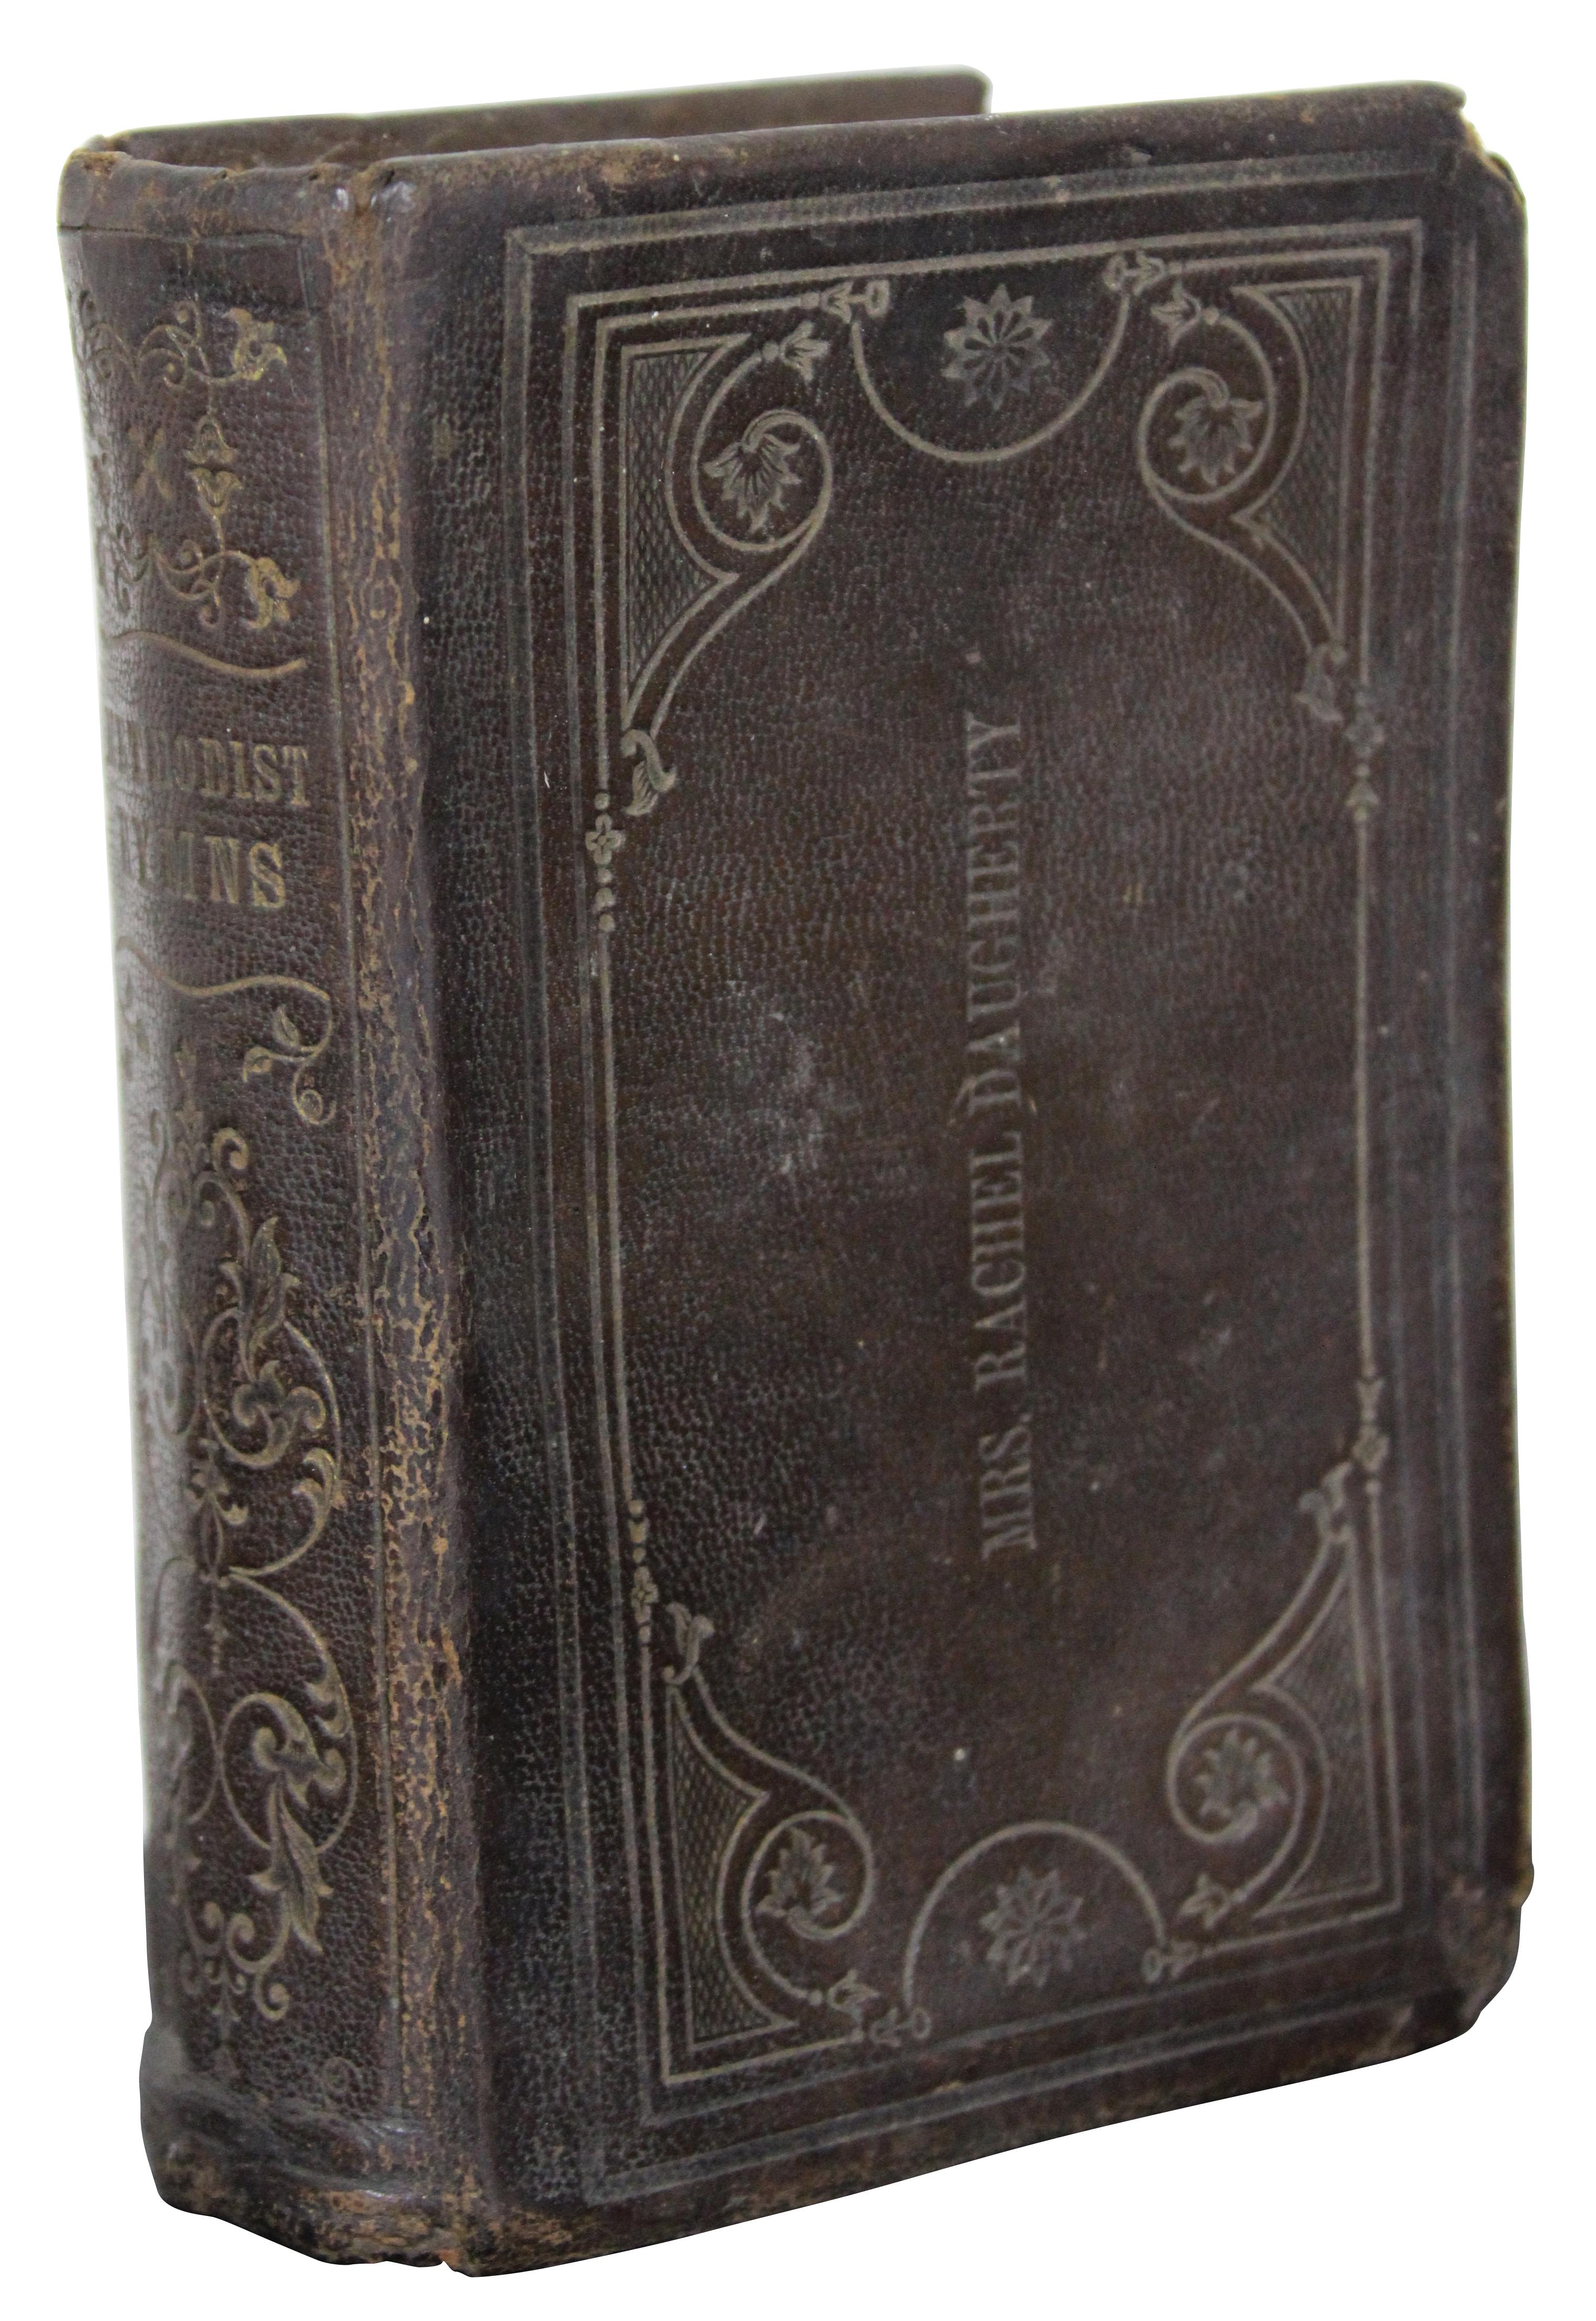 Pair of antique mid-late 19th century Christian hymnals, one leather bound book of Methodist Hymns, impressed with the name Mrs. Rachel daugherty, and one blue cloth bound American school Hymn book published by Crosby, Nichols &